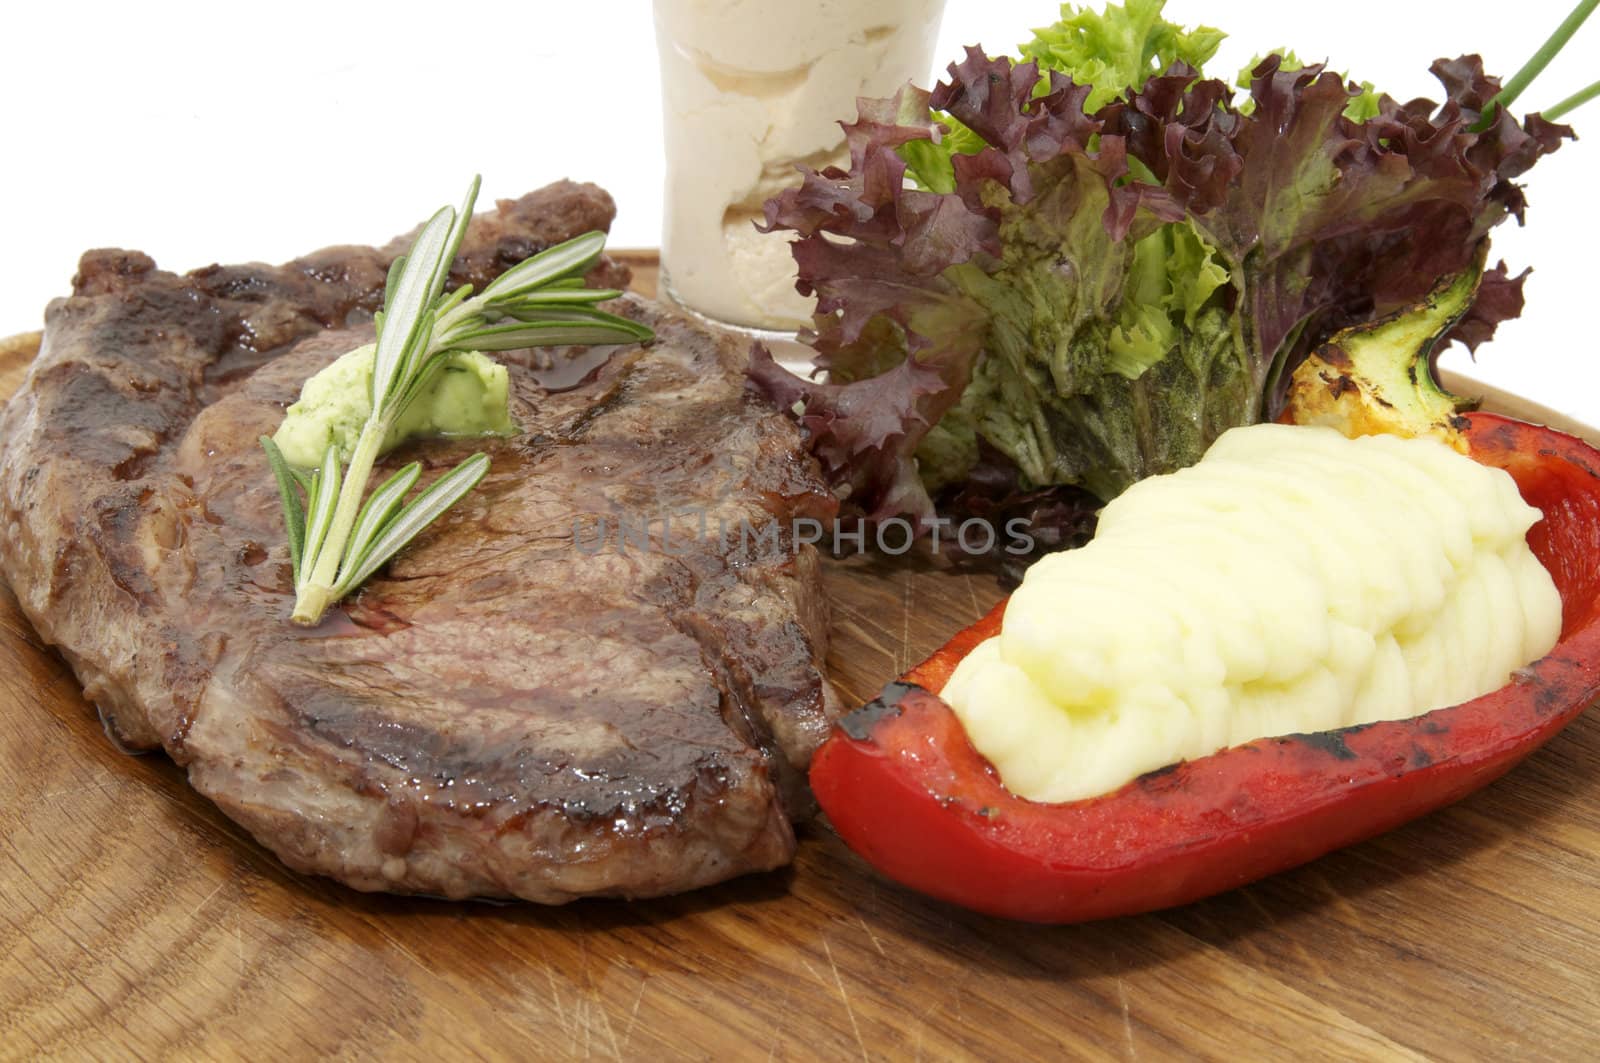 Steak and fresh herbs on a wooden plate over white background